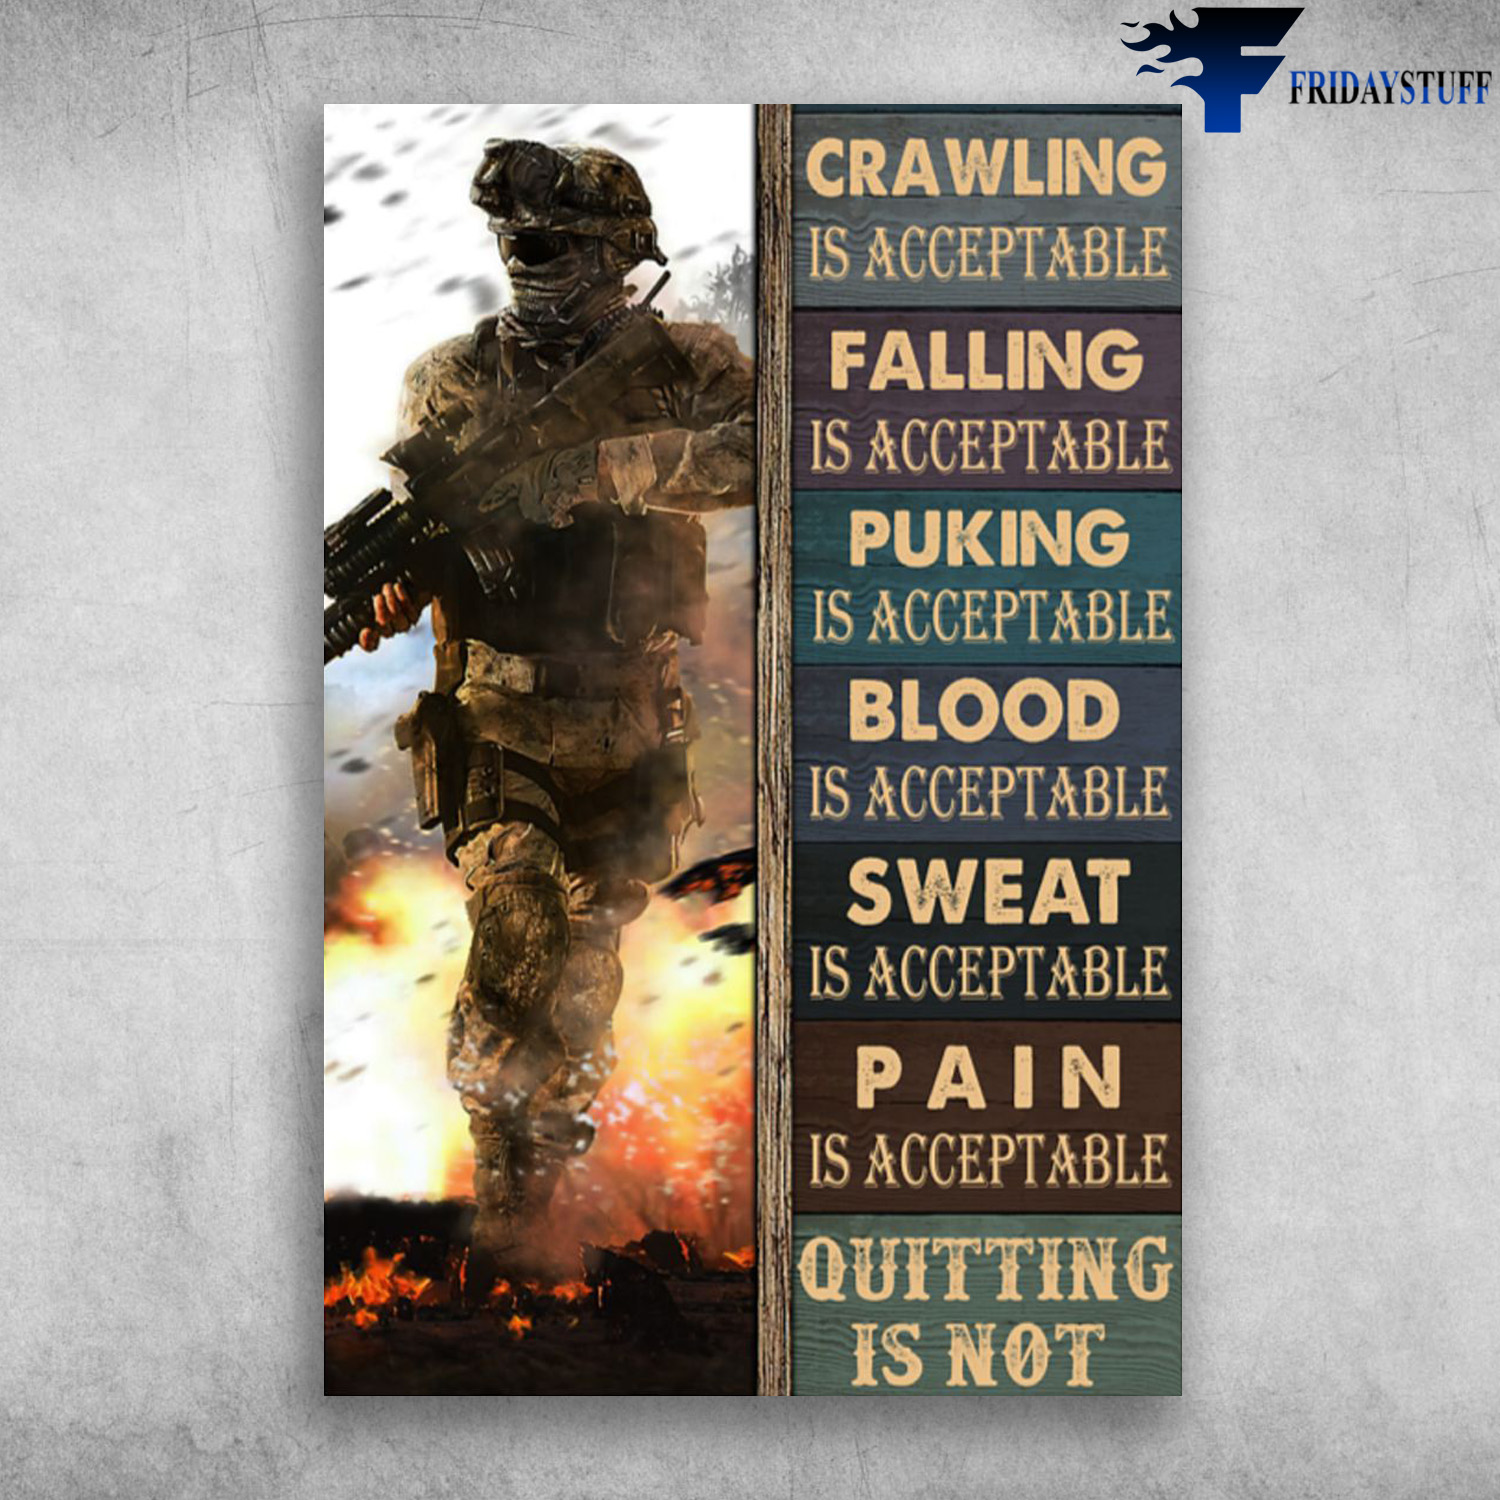 Soldier With The Gun - Crawling Is Acceptable, Falling Is Acceptable, Blood Is Acceptable, Sweat Is Acceptable, Pain Is Acceptable, Quitting Is Not